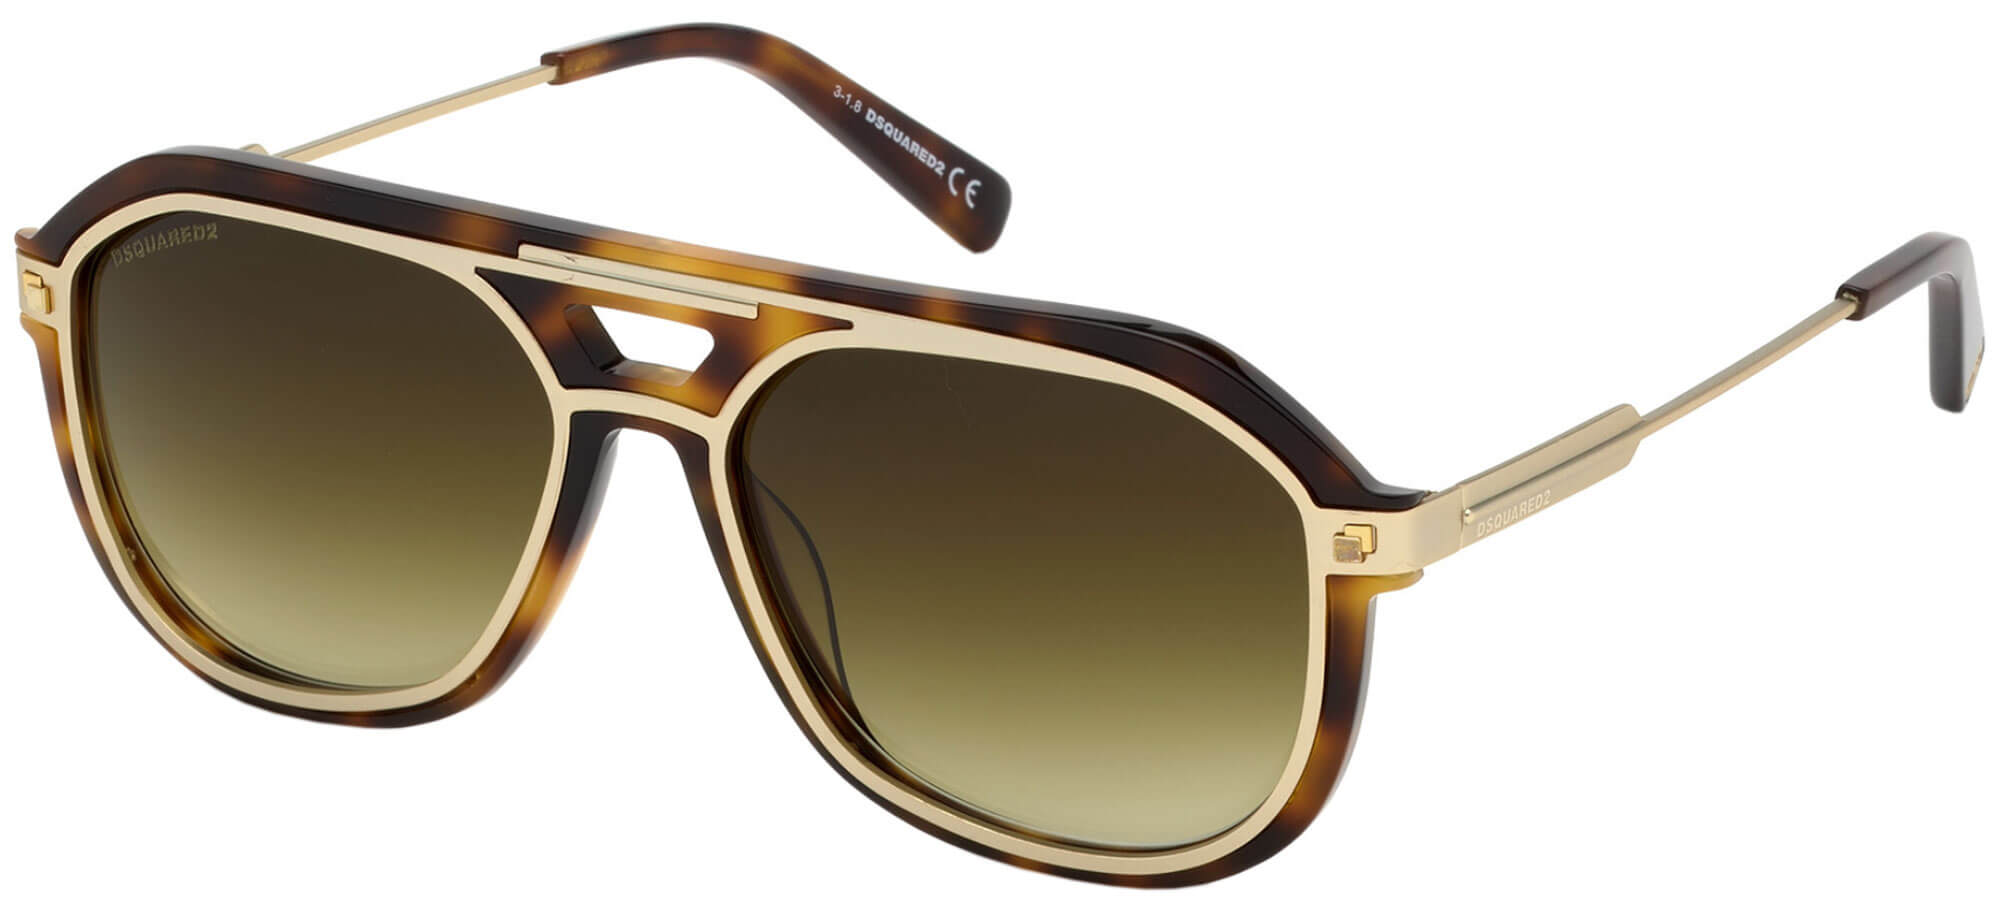 Dsquared2BRYCE DQ 0307Havana/green Shaded (52P F)